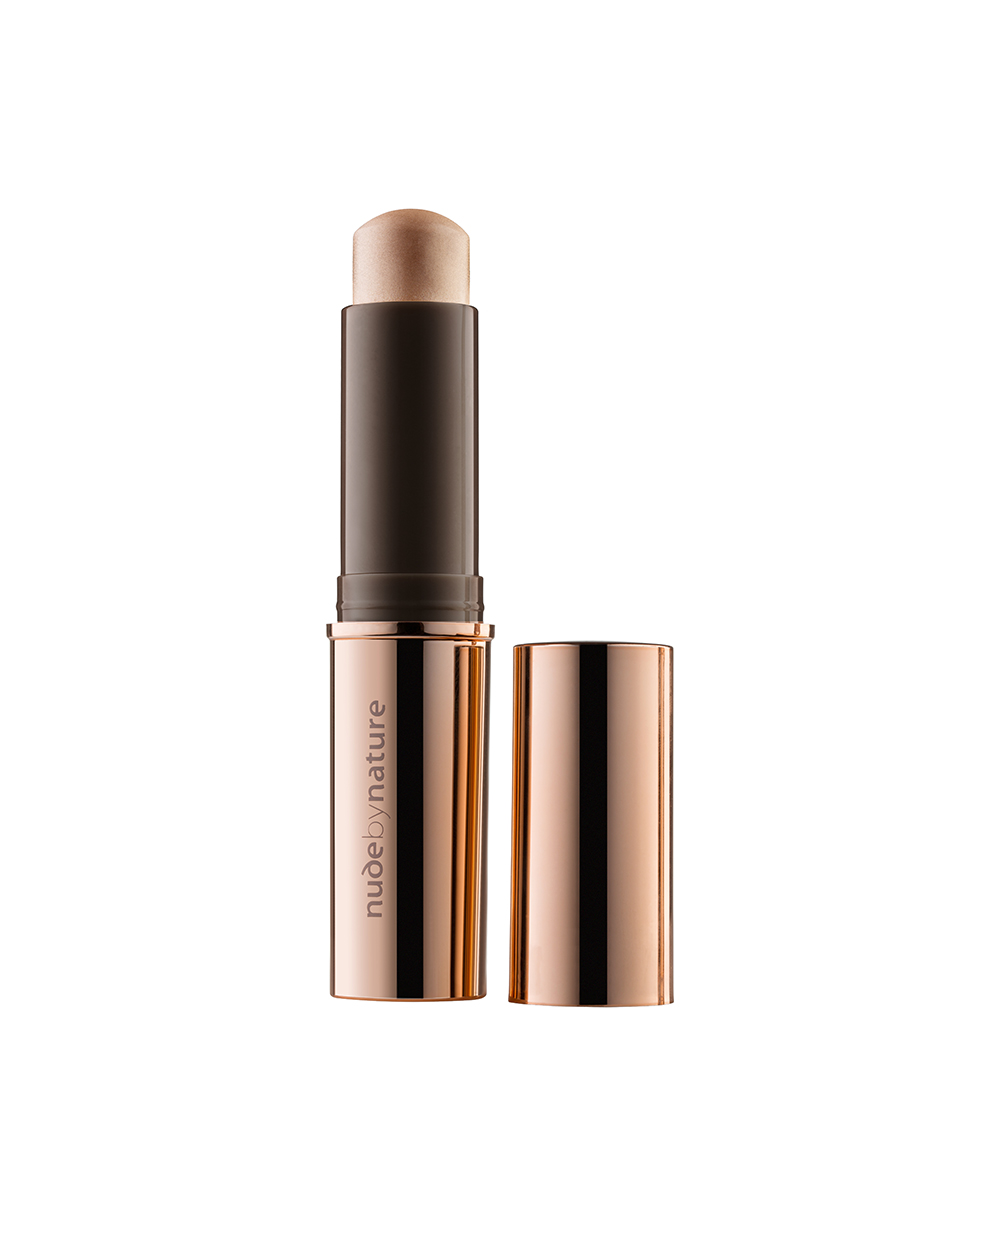 Nude by Nature’s Touch of Glow Highlight Stick, $30, makes strobing a cinch. Run it across cheekbones, down the middle of the nose, cupids bow, and outer corners of brow, and blend with your fingertips